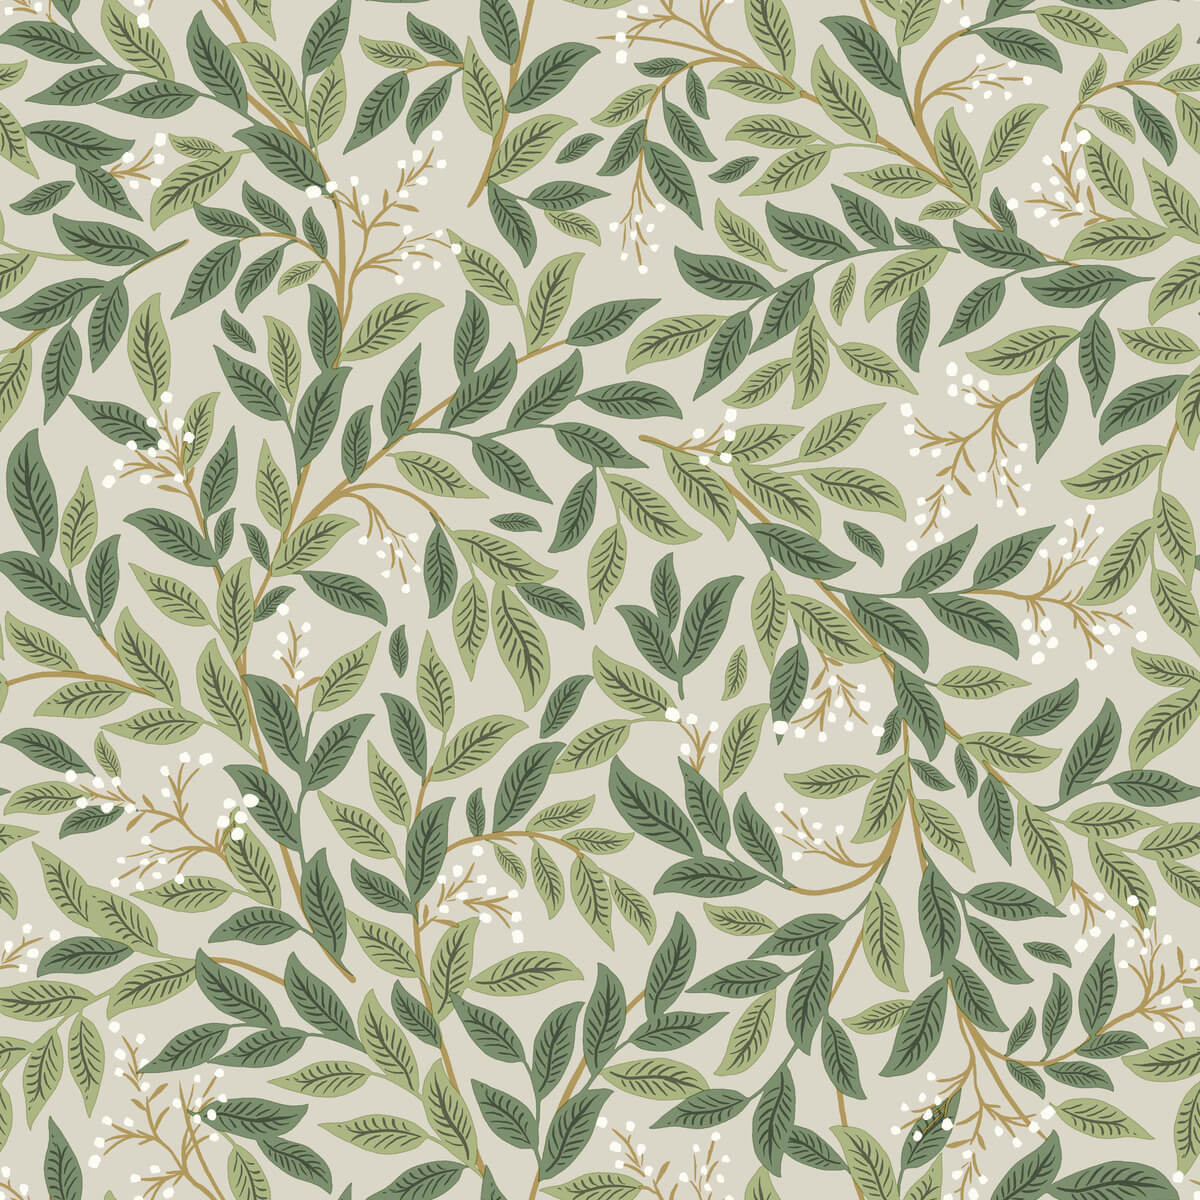 Rifle Paper Co. Second Edition Peel & Stick Wallpaper - SAMPLE